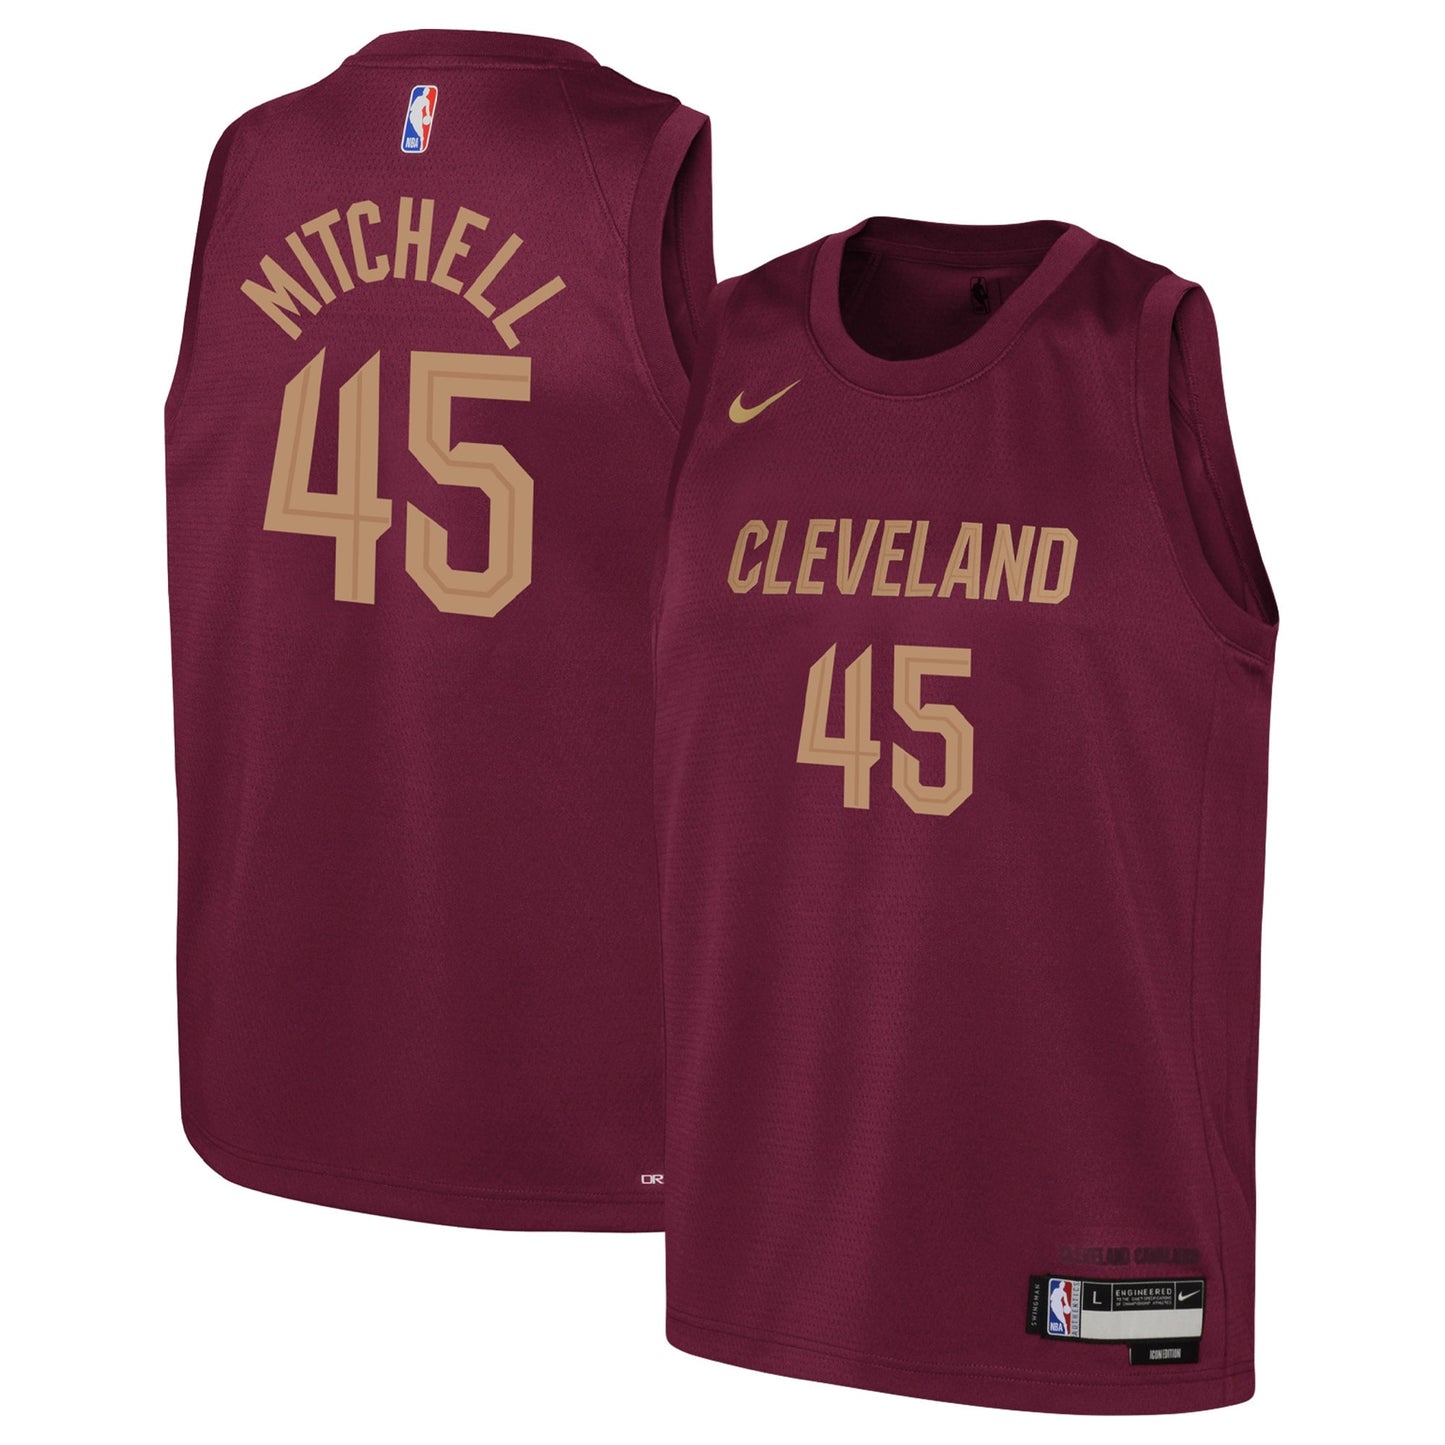 Donovan Mitchell Cleveland Cavaliers Nike Youth 2022/23 Swingman Jersey - Icon Edition - Wine